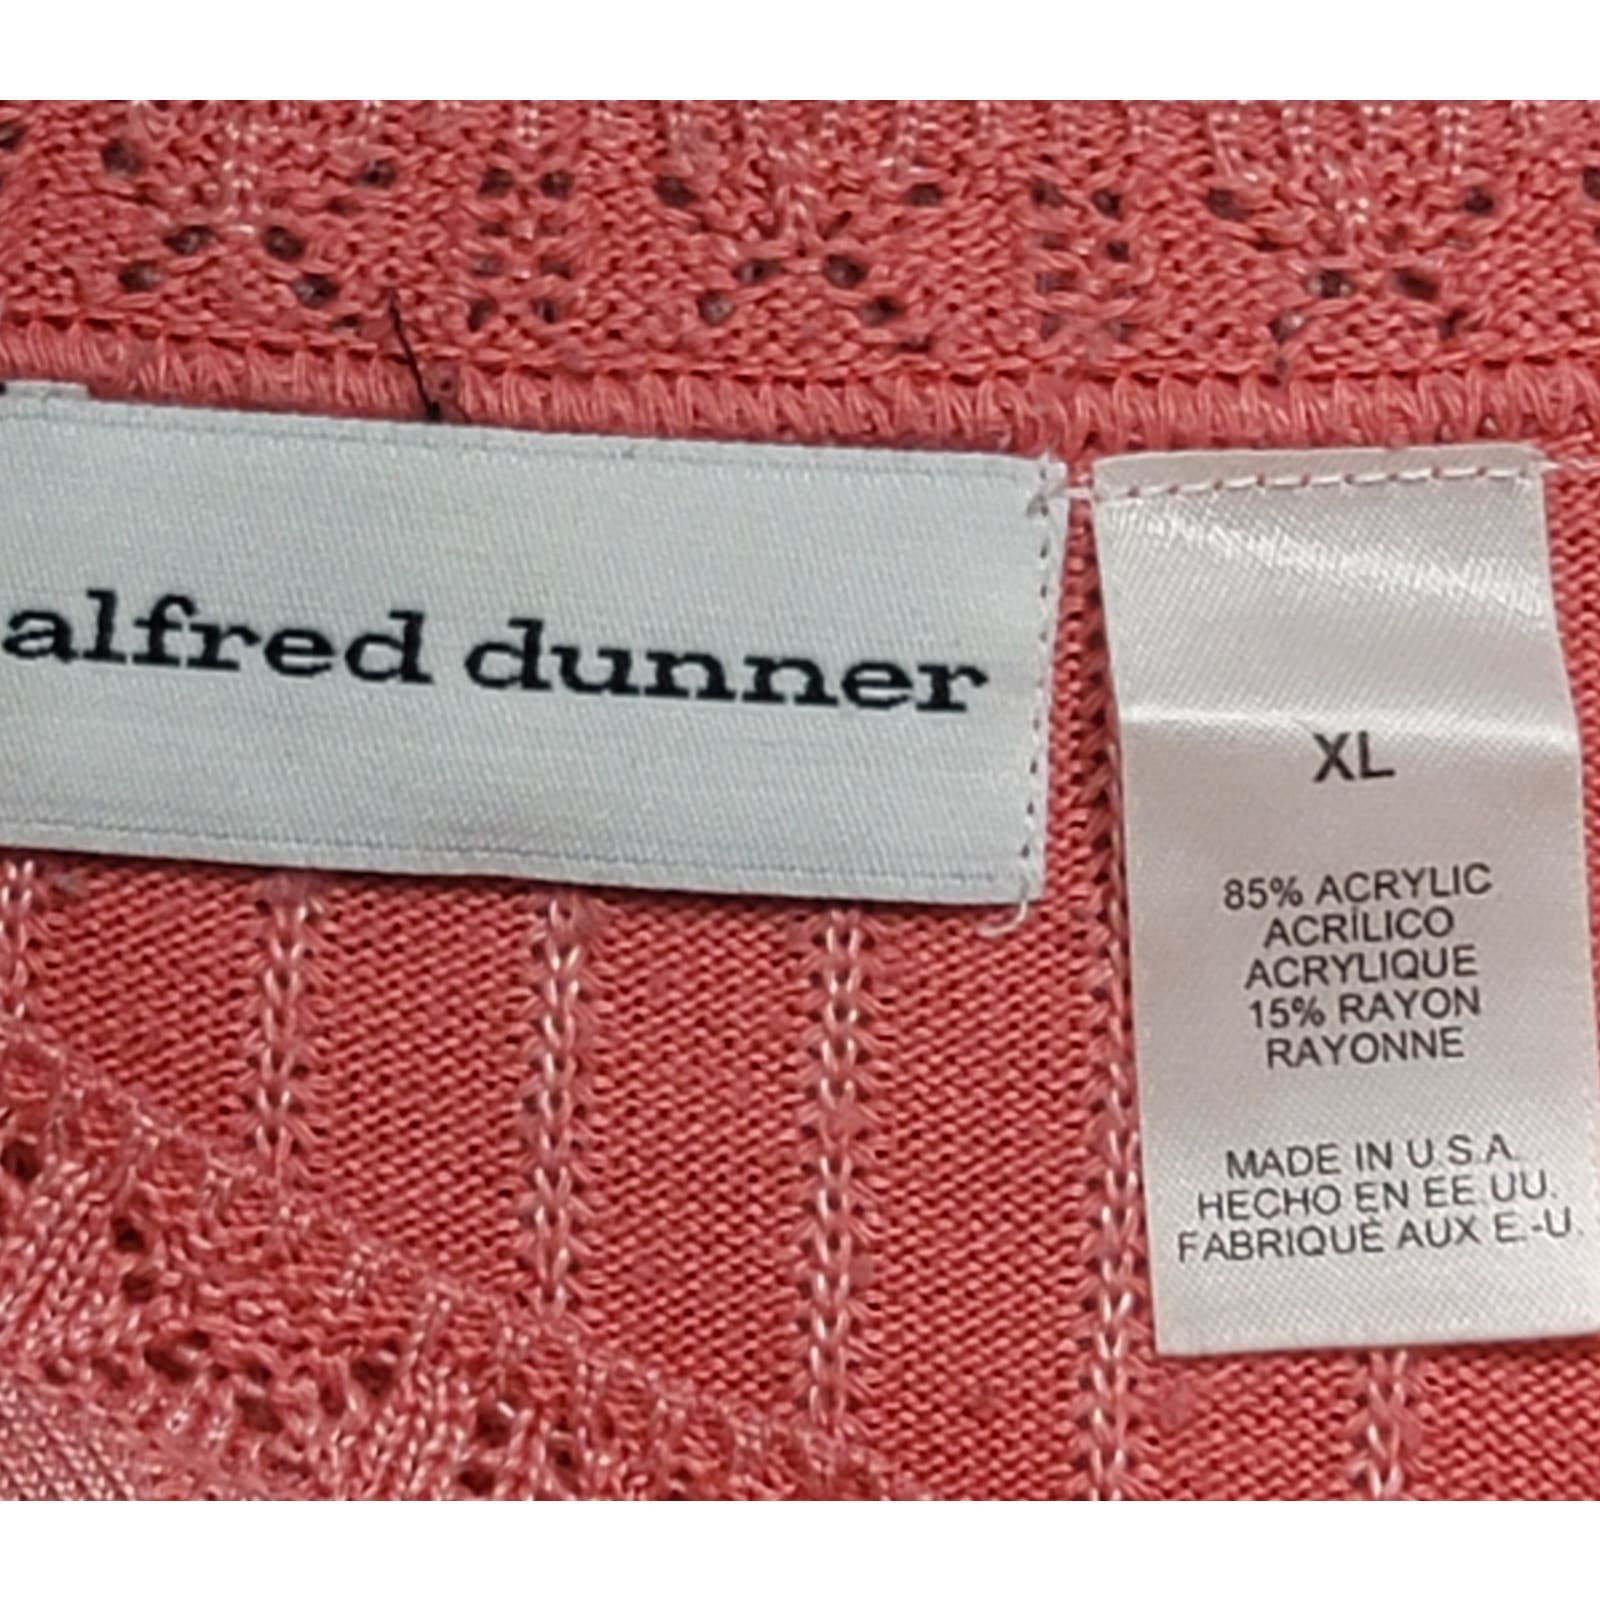 Other Alfred Dunner Coral Orange Pink Round Neck Top XL Stretch Size XL / US 12-14 / IT 48-50 - 4 Preview